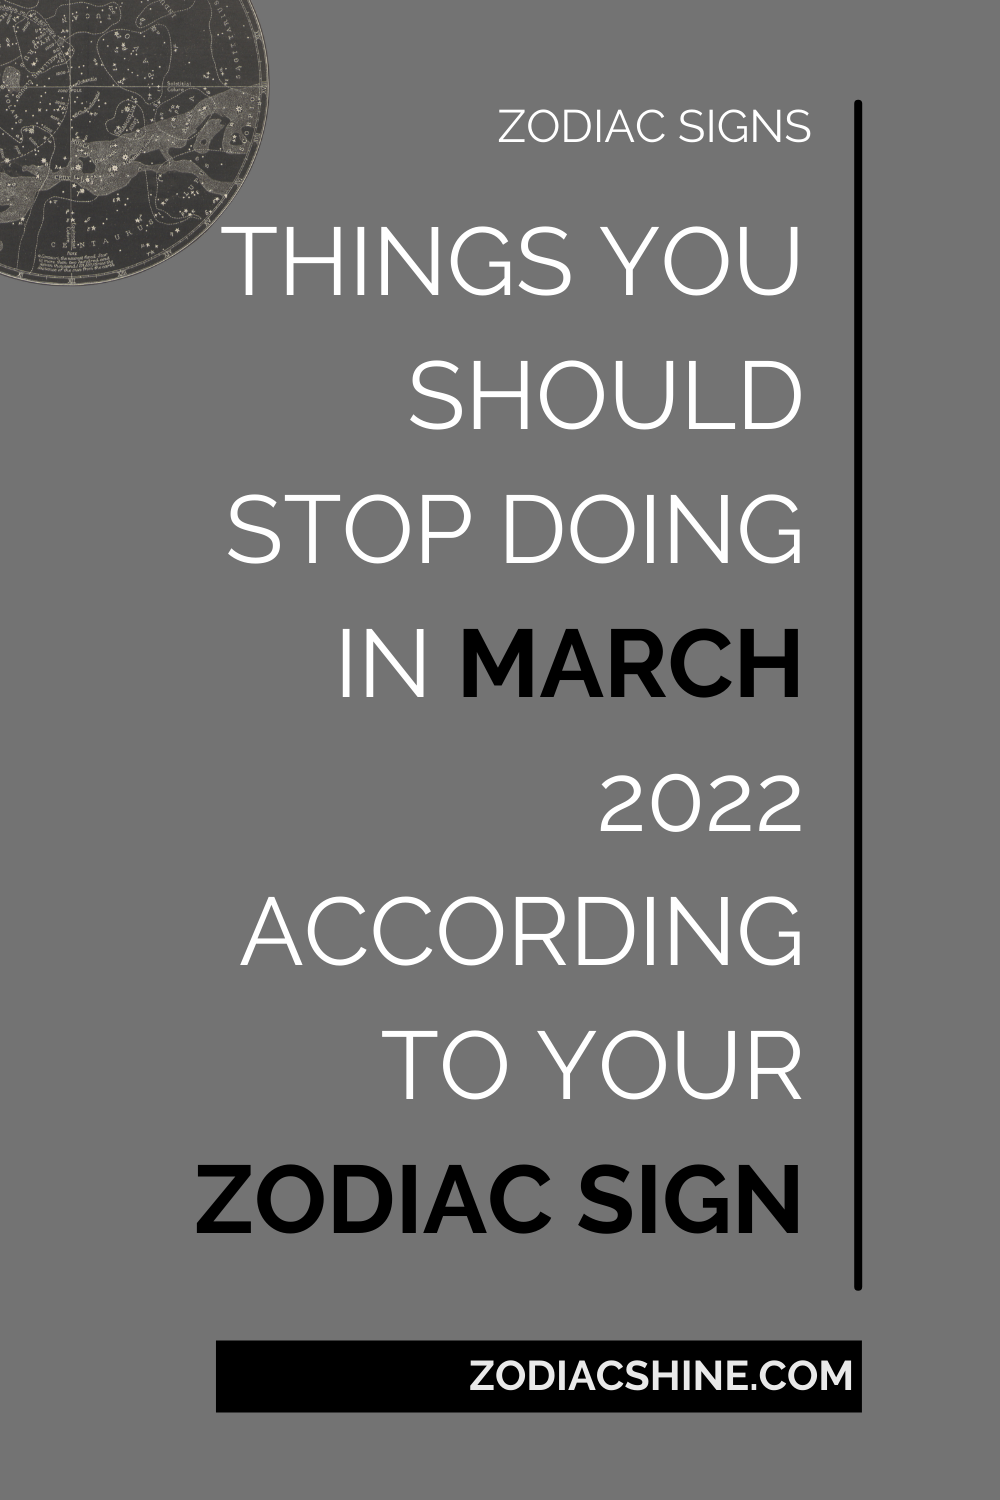 THINGS YOU SHOULD STOP DOING IN MARCH 2022 ACCORDING TO YOUR ZODIAC SIGN